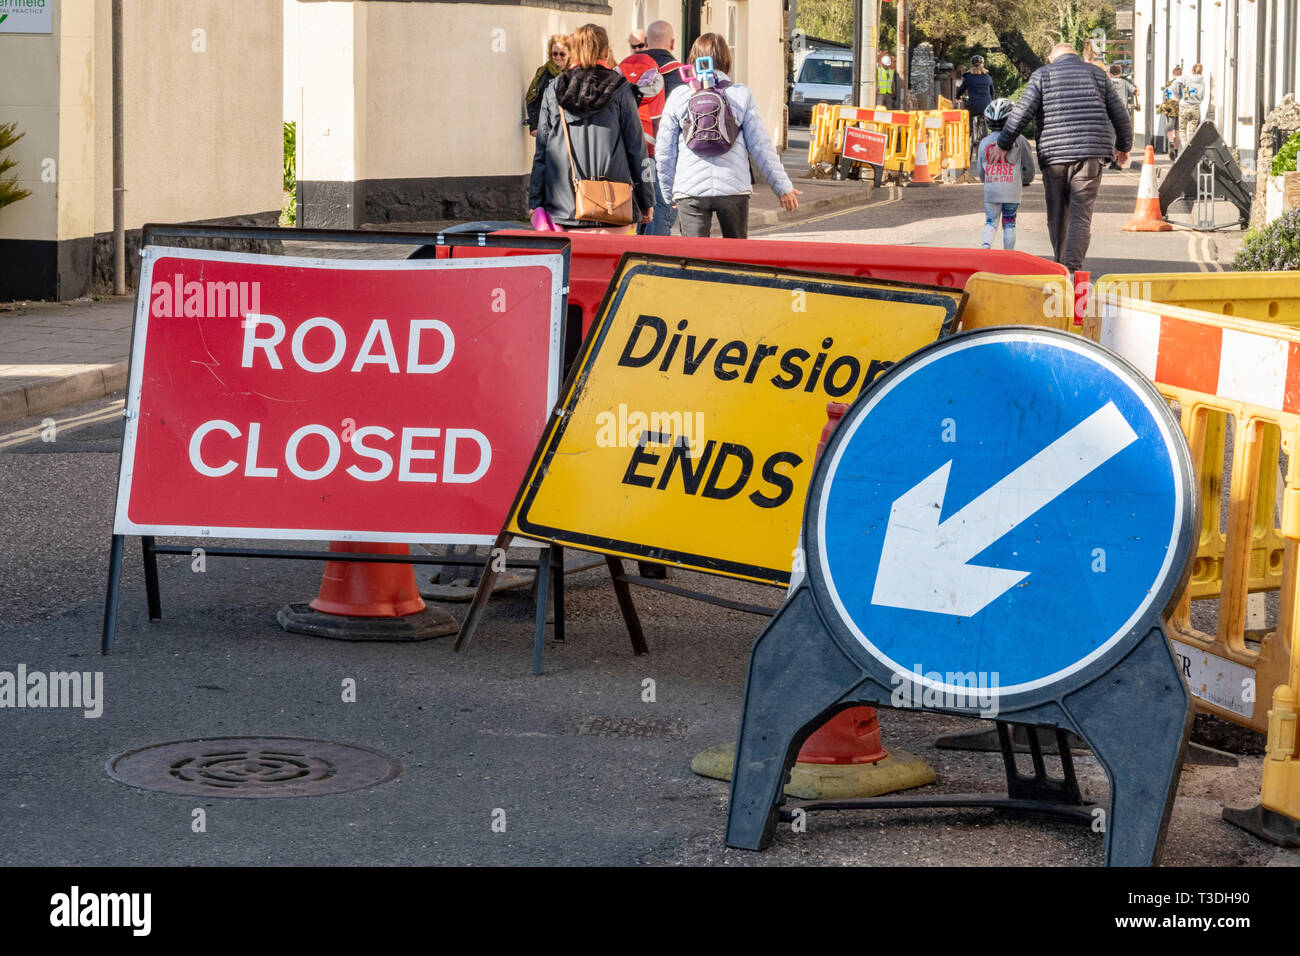 People walking past a road closure. Road closed, Diversion, ends, keep left signs and notices, Sidmouth, Devon, UK Stock Photo